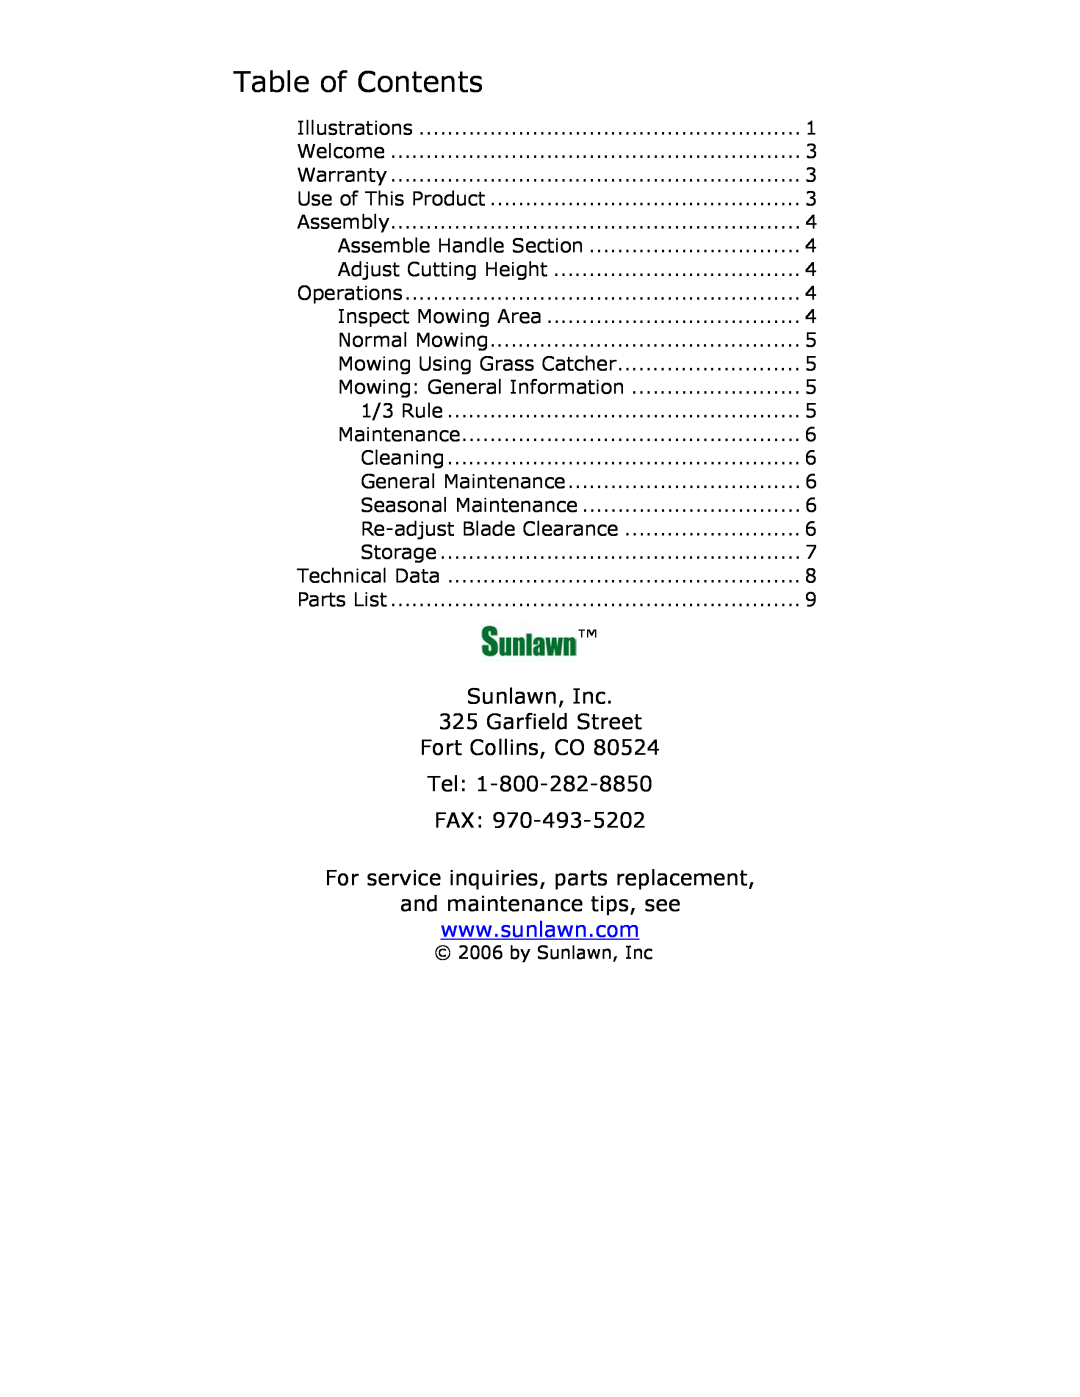 Sun Lawn LMM owner manual Table of Contents, Sunlawn, Inc 325 Garfield Street Fort Collins, CO Tel FAX 